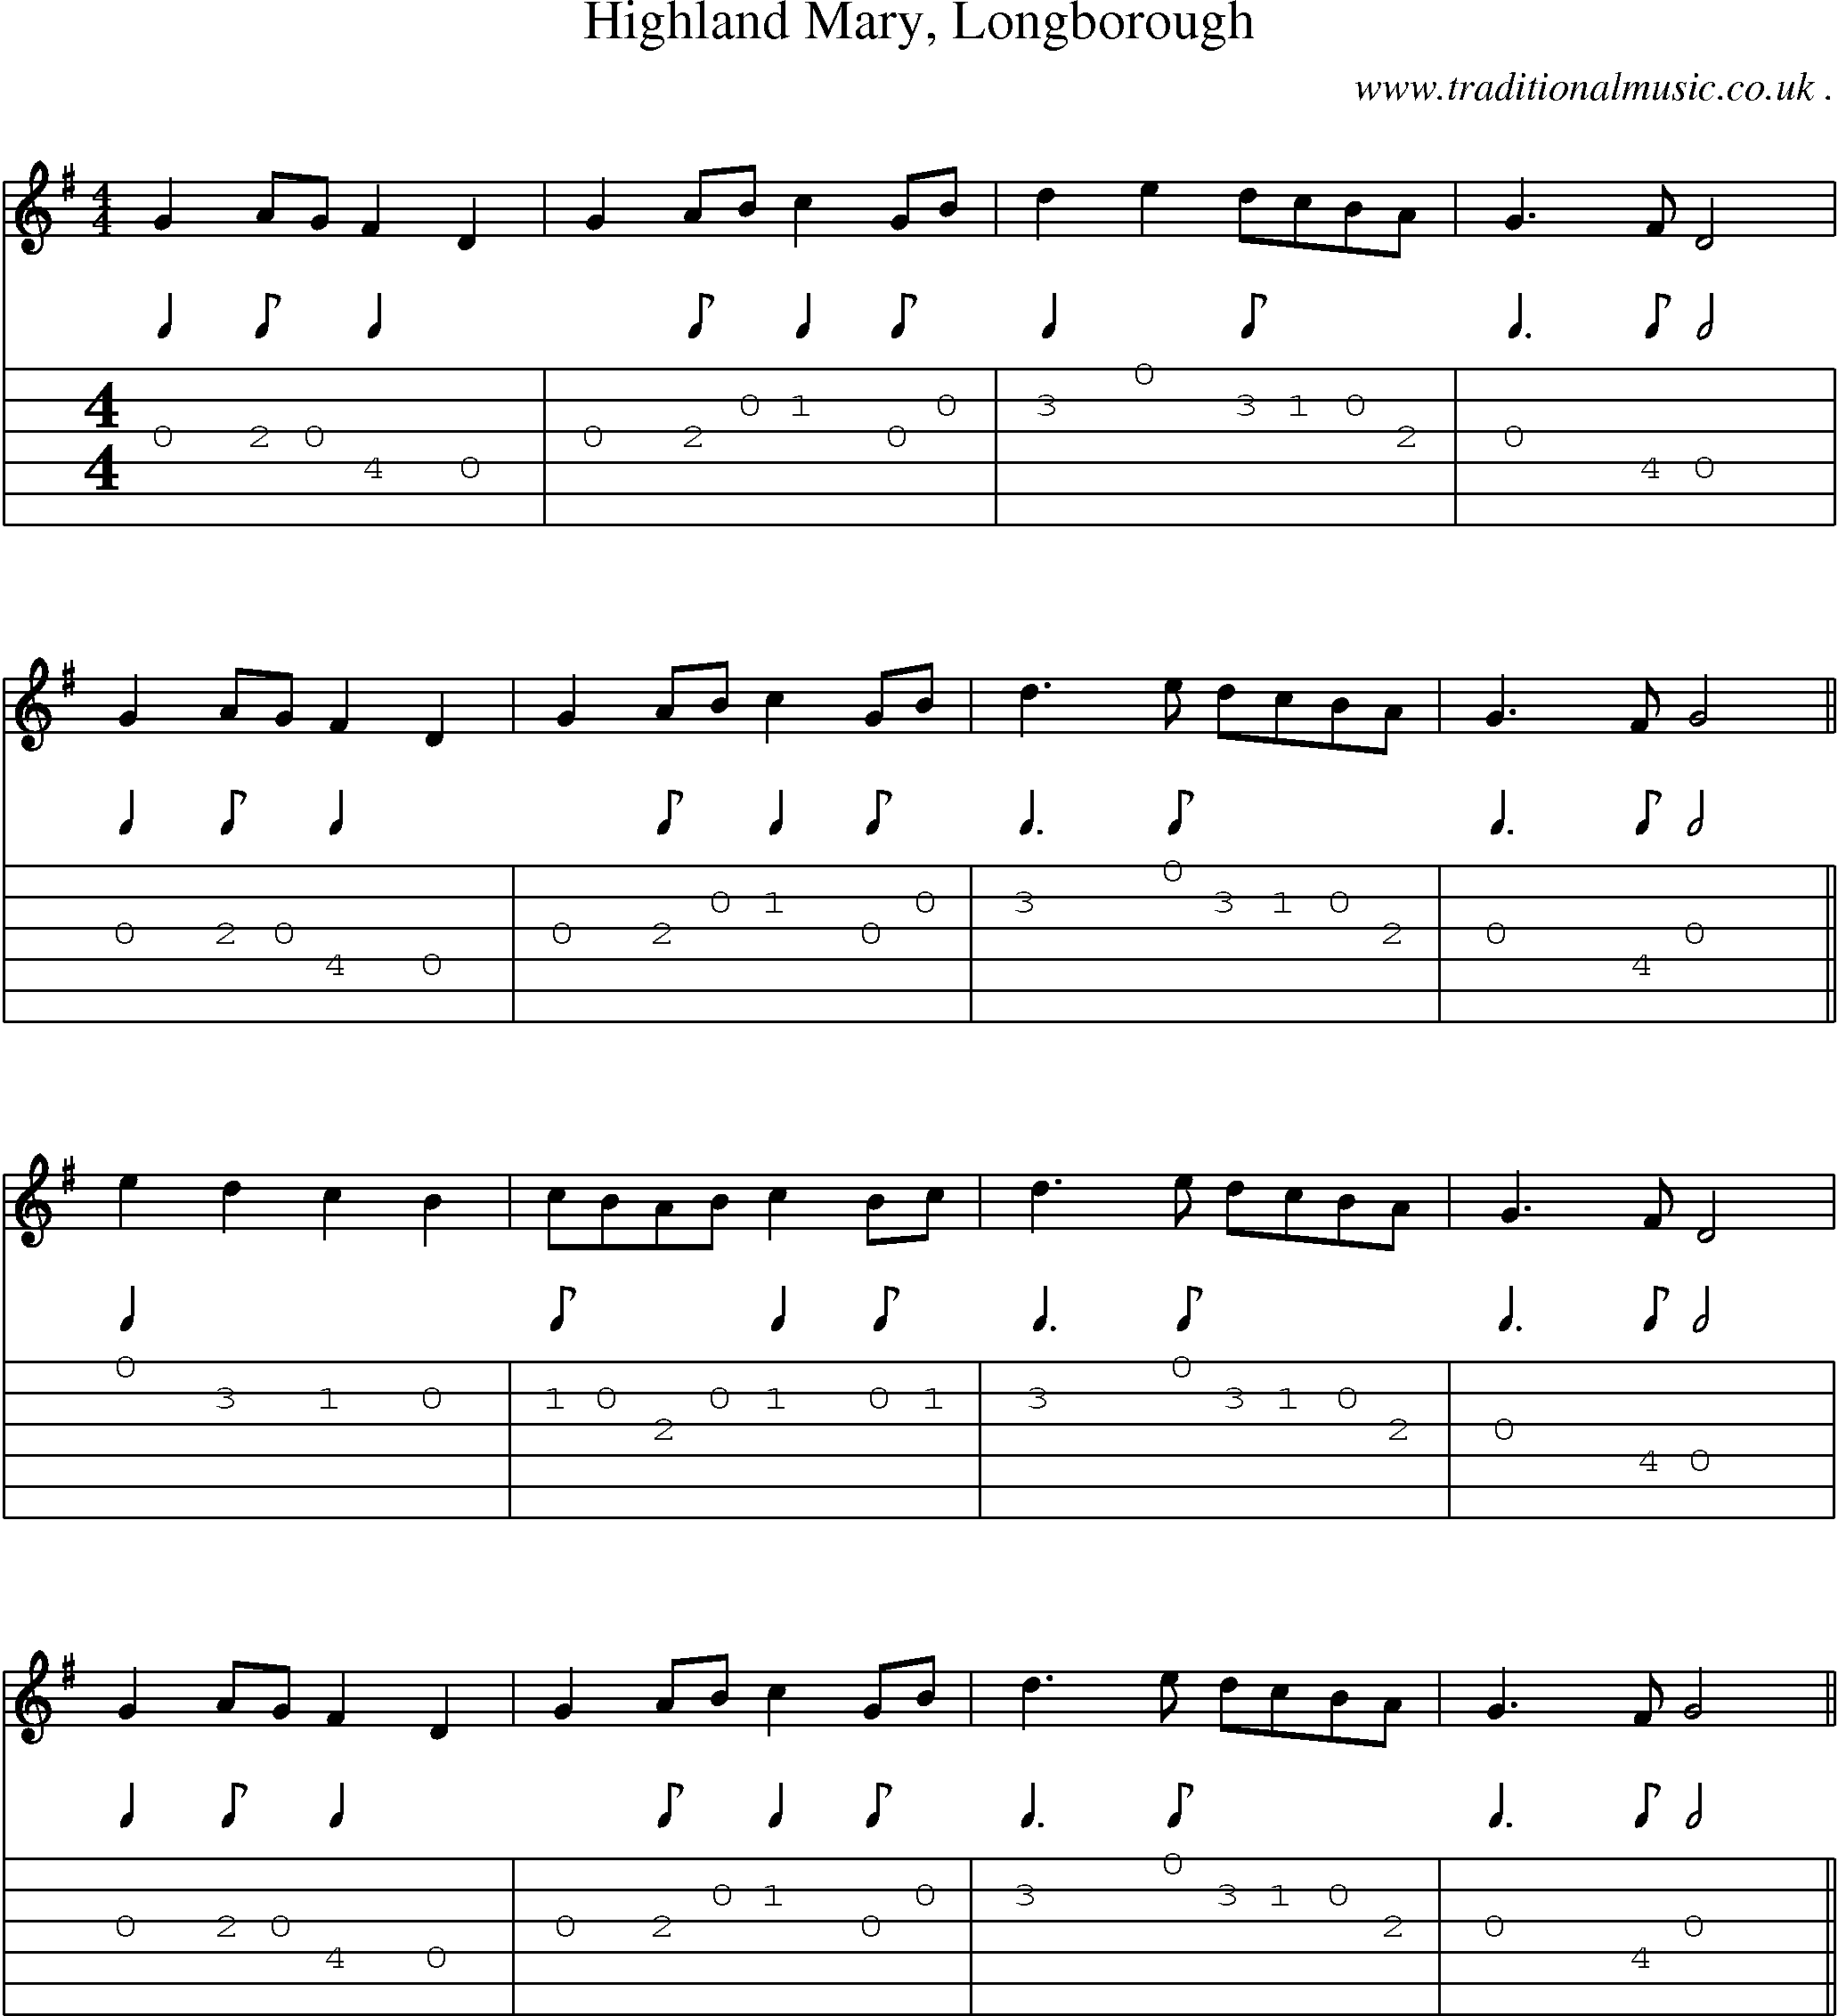 Sheet-Music and Guitar Tabs for Highland Mary Longborough